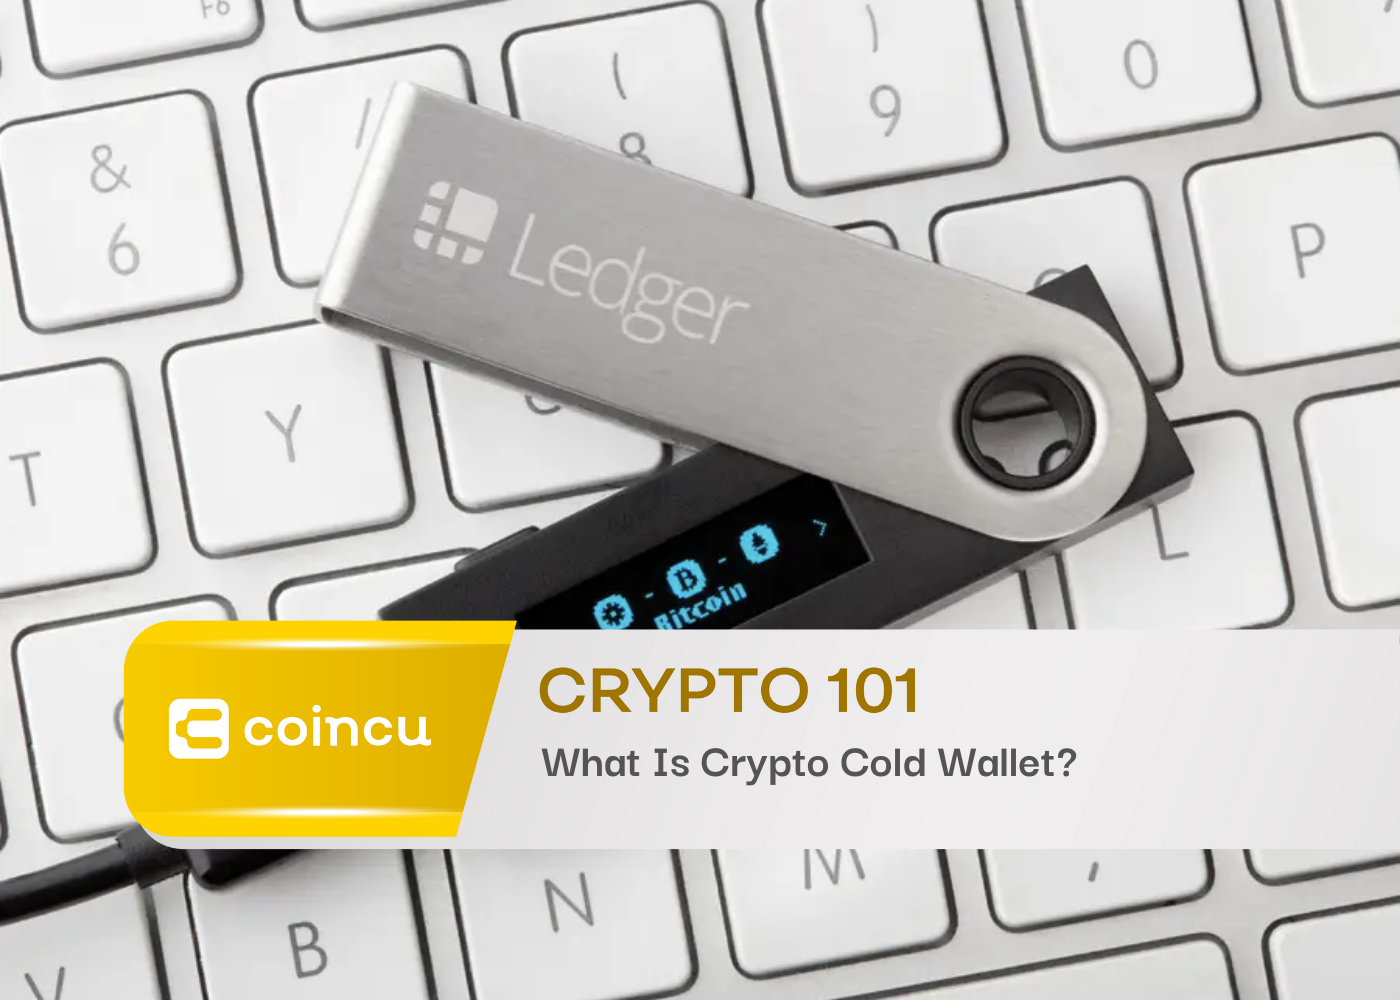 Crypto 101: What Is Crypto Cold Wallet?